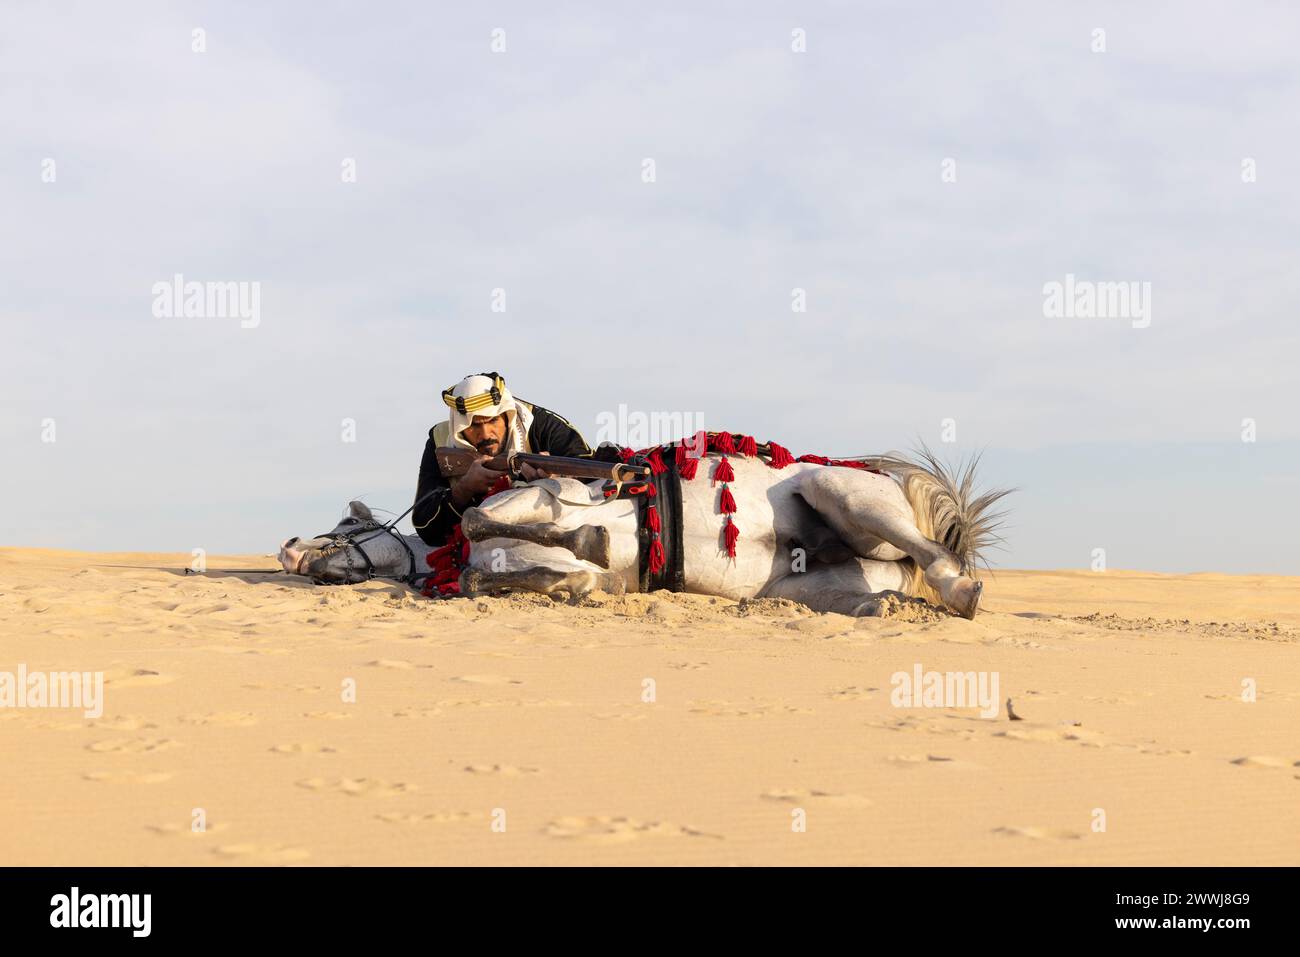 Saudi man in traditional clothing with his white stallion, aiming a hunting rifle from behind his horse Stock Photo